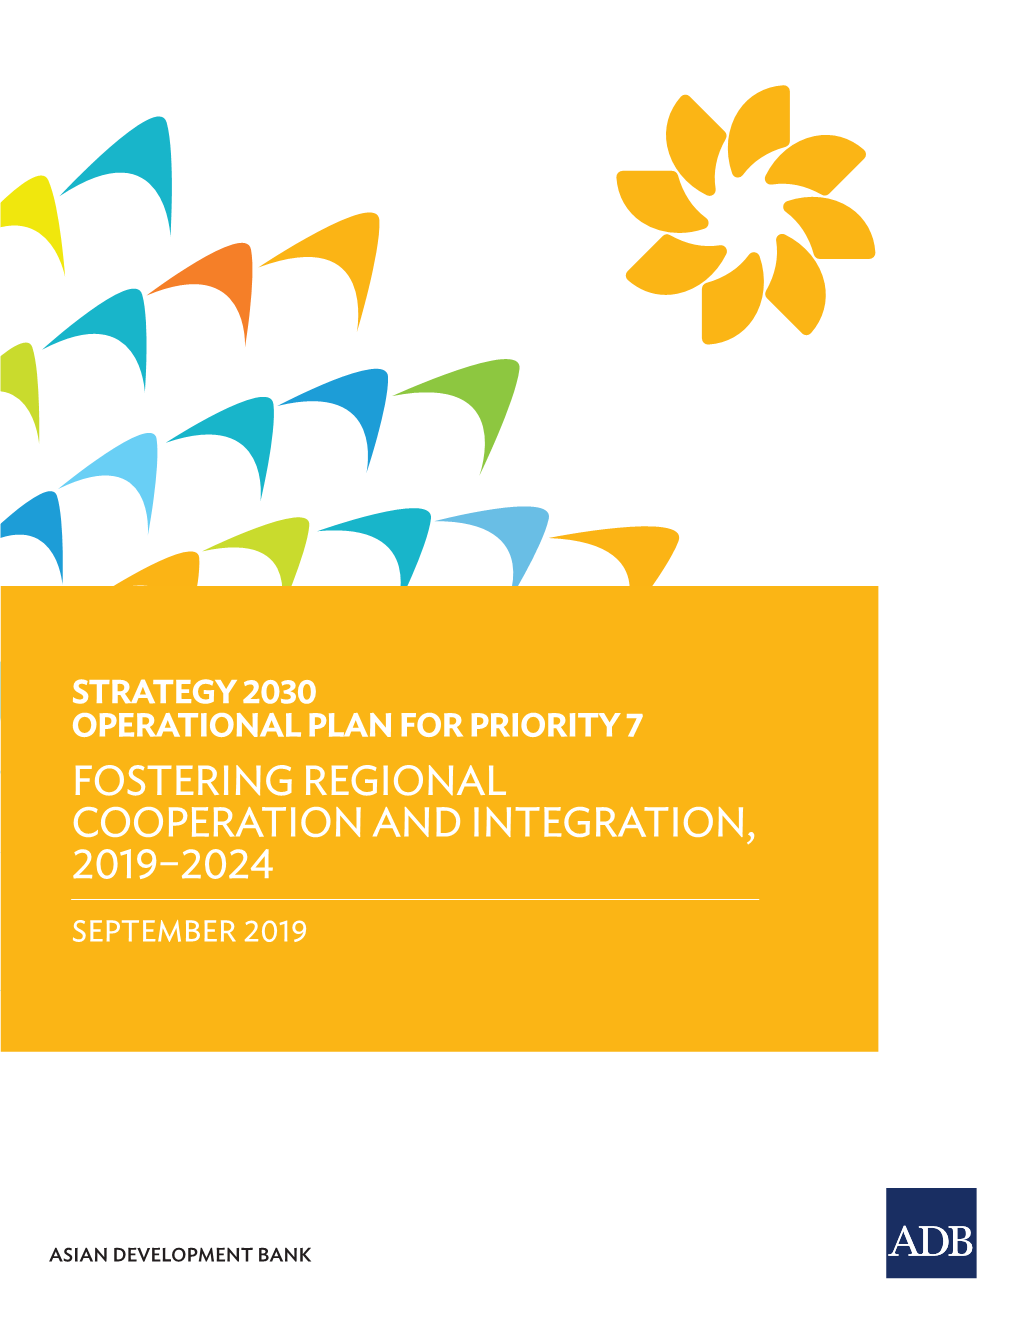 Strategy 2030 Operation Plan for Priority 7: Fostering Regional